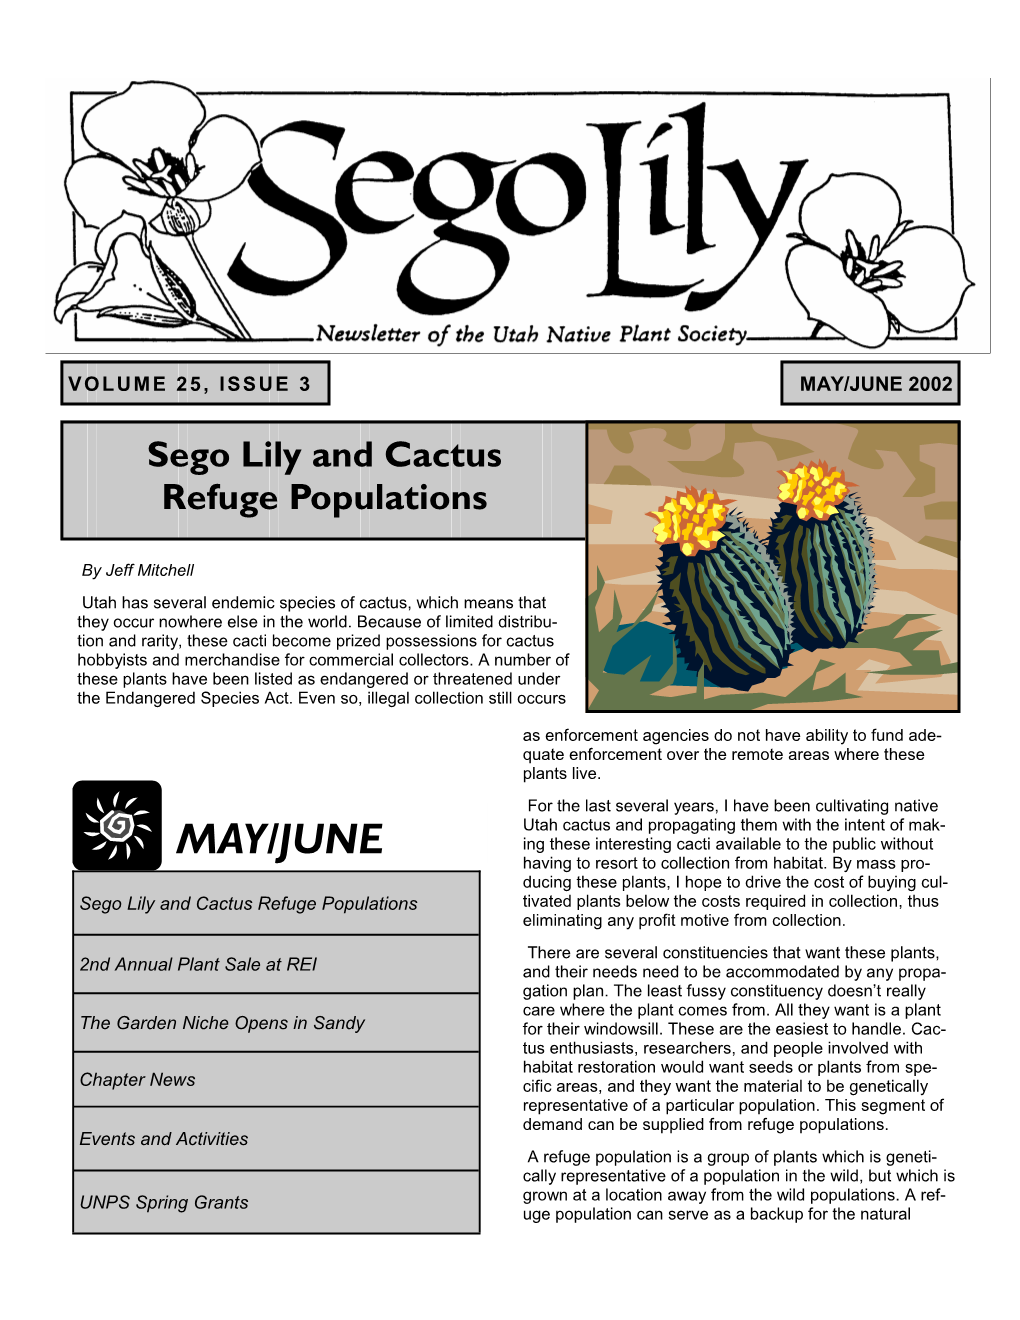 Sego Lily and Cactus Refuge Populations